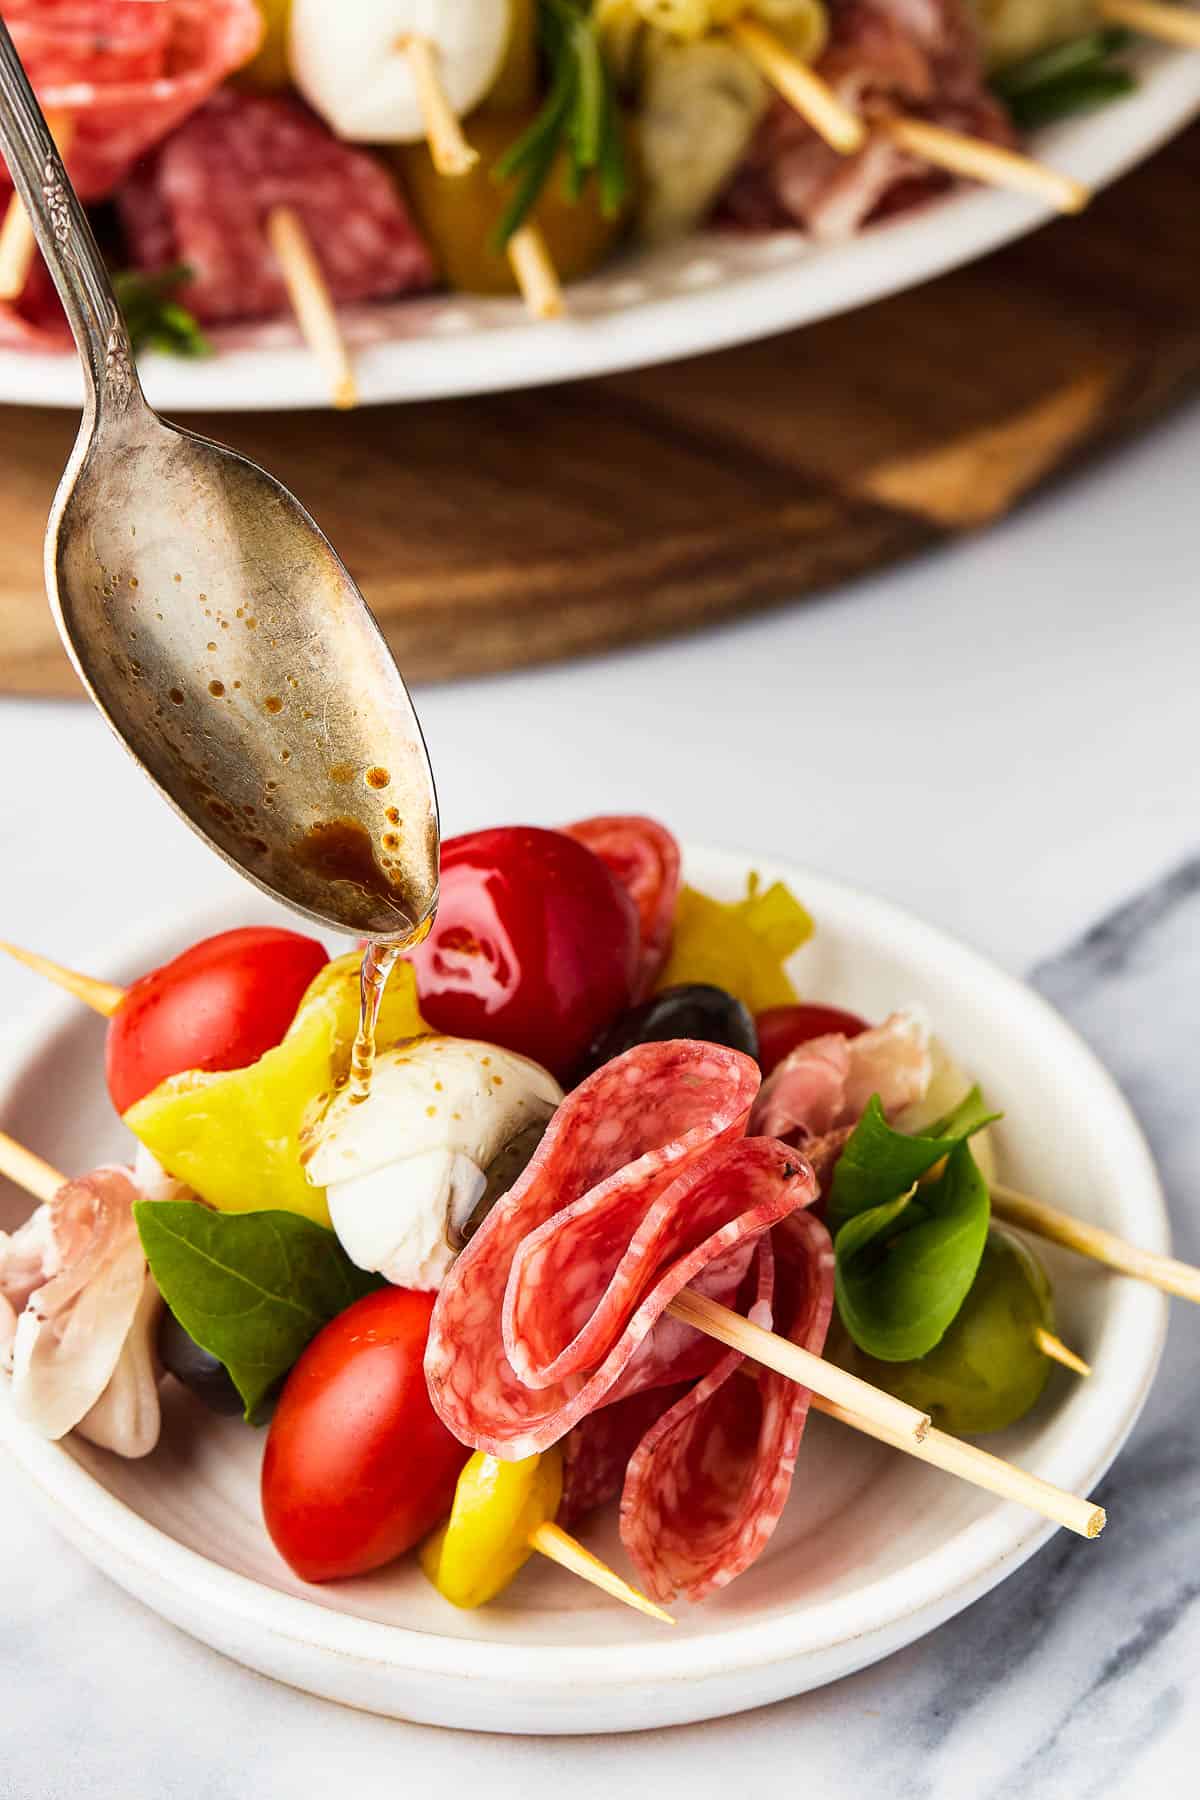 A spoon drizzling balsamic vinegar over a serving of antipasto.